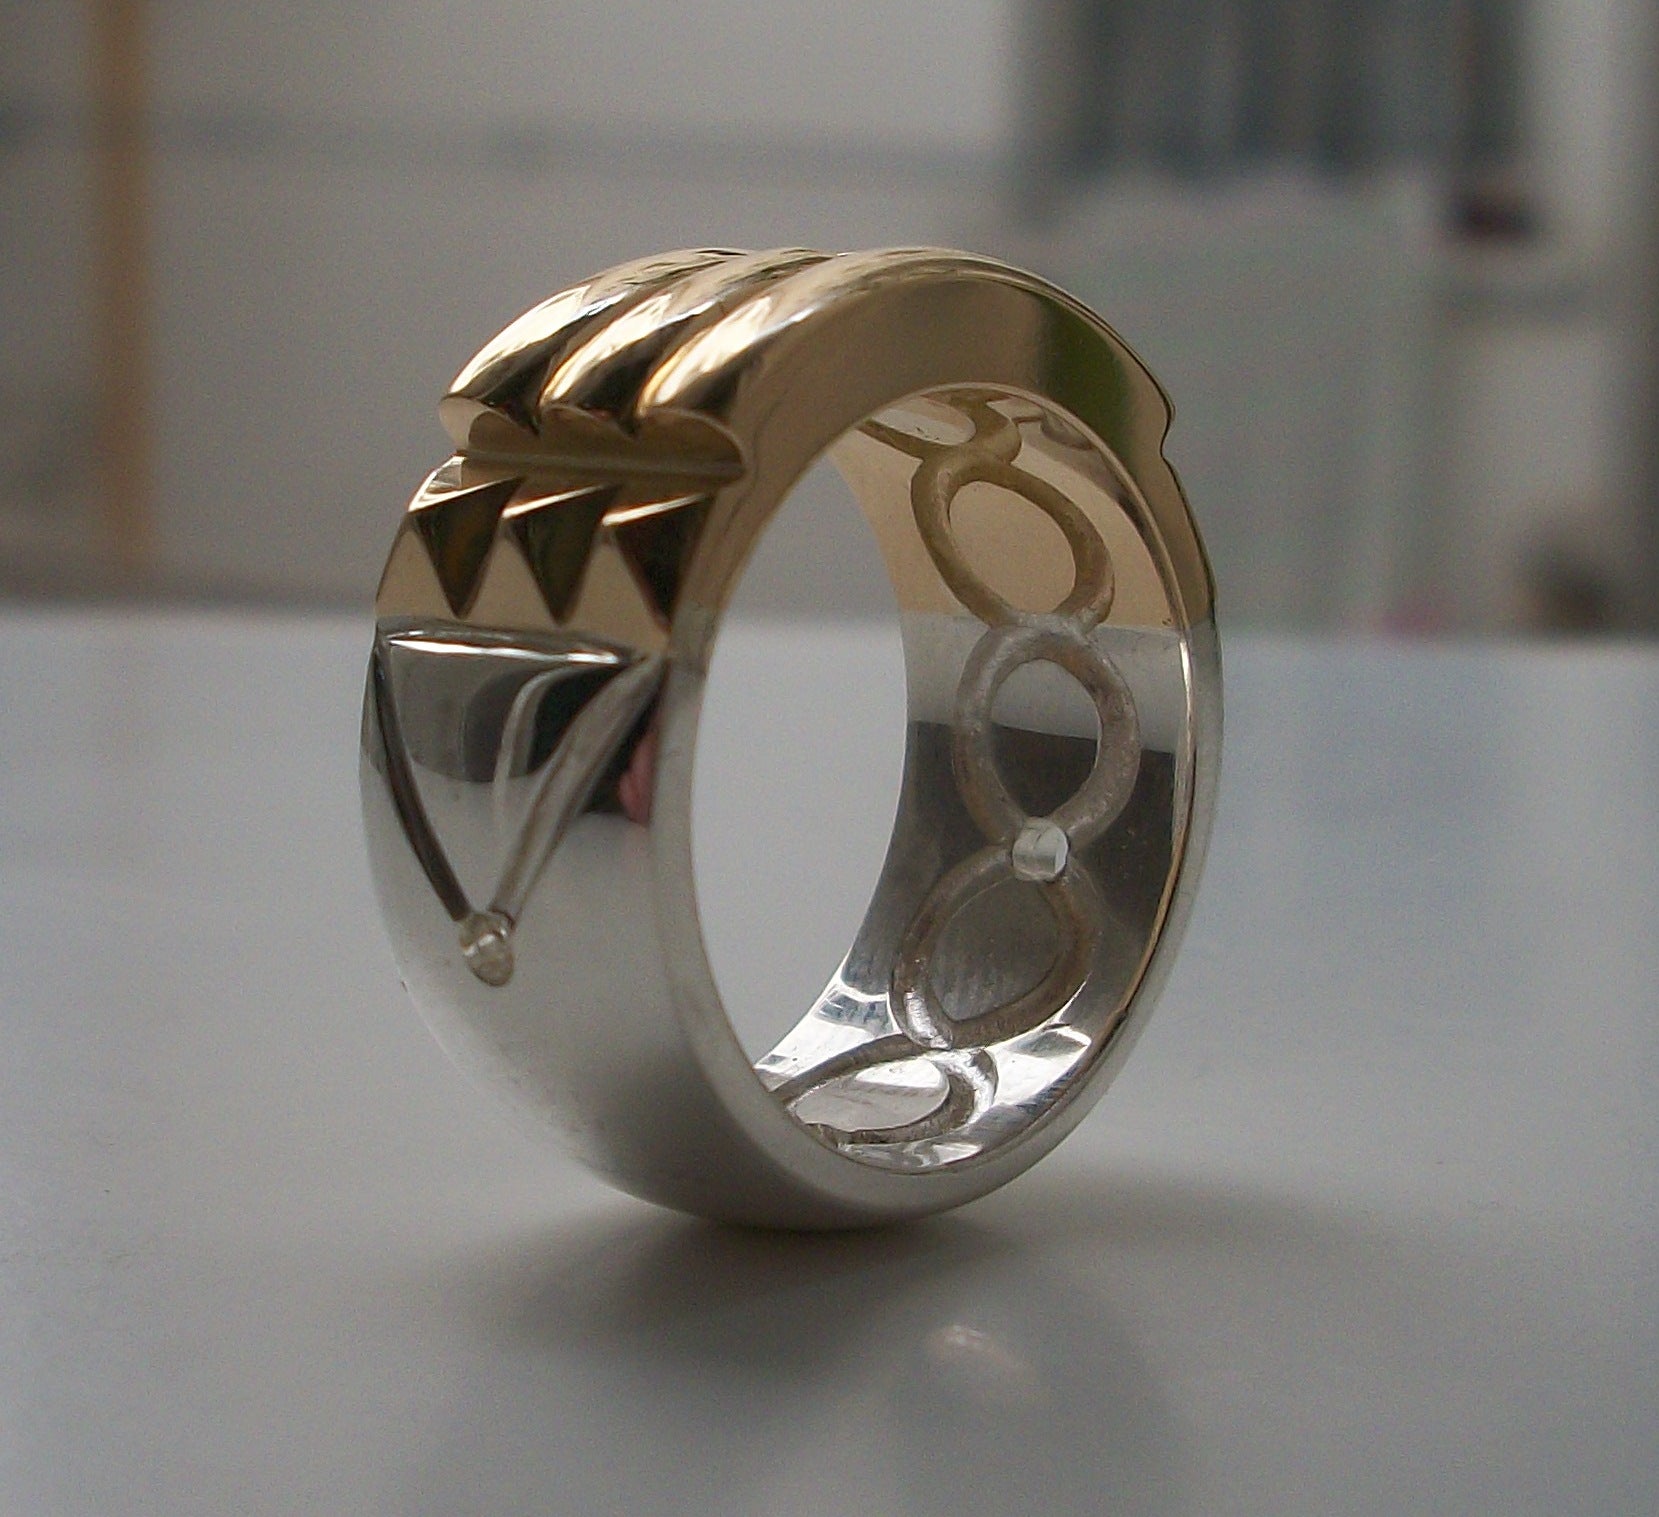 Atlantis ring - 18K Solid Gold Upper Area & 925 Sterling Silver Lower Area - ALL SIZES